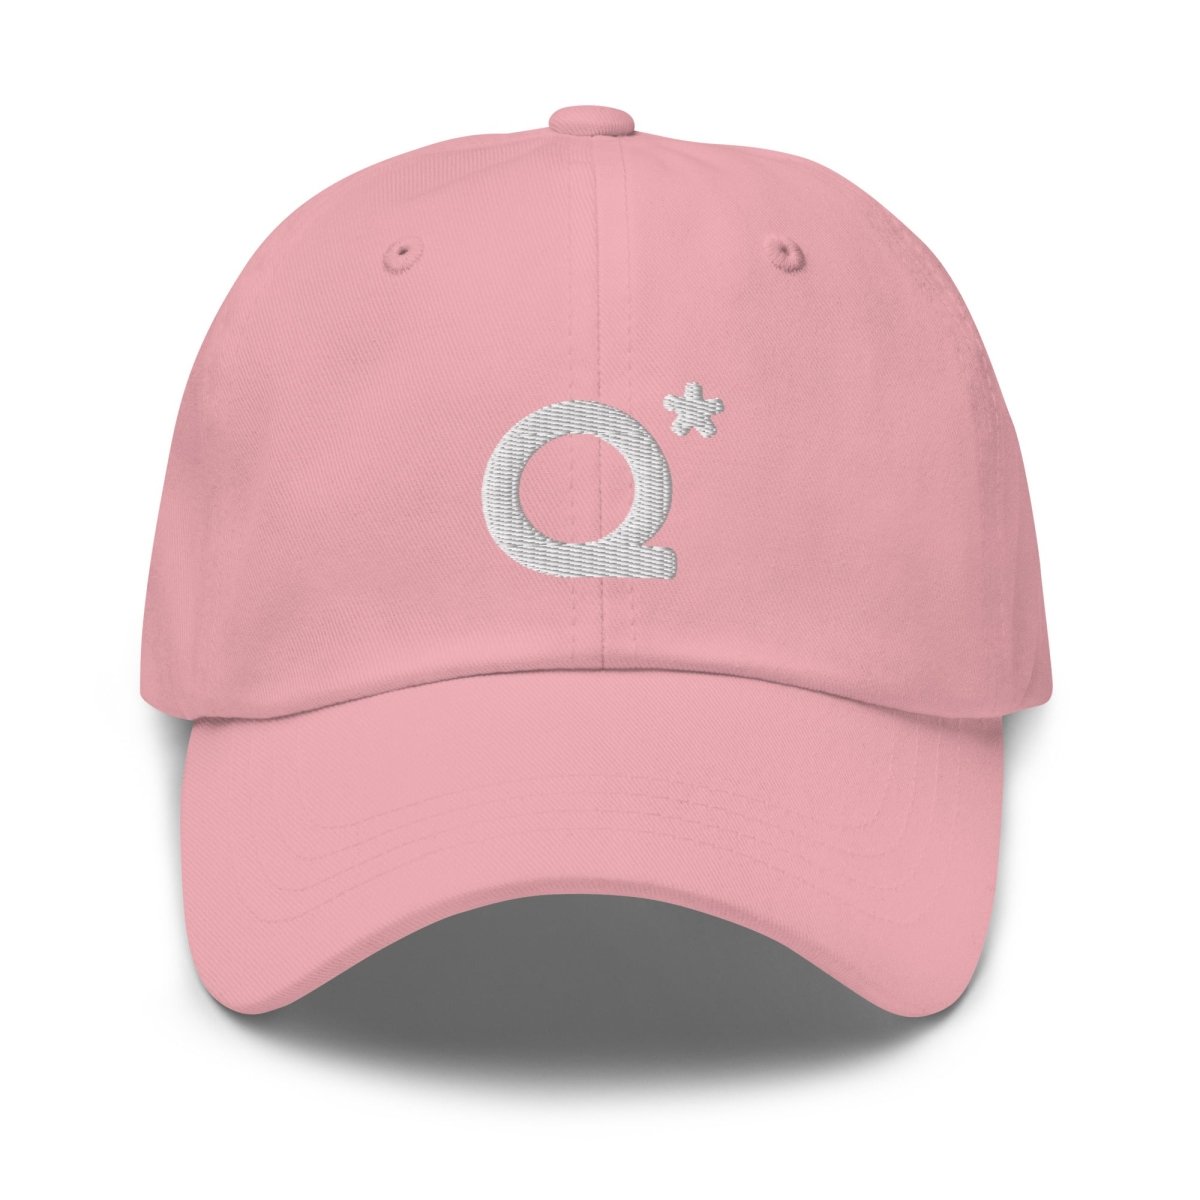 Q* (Q - Star) Embroidered Cap 1 - Pink - AI Store